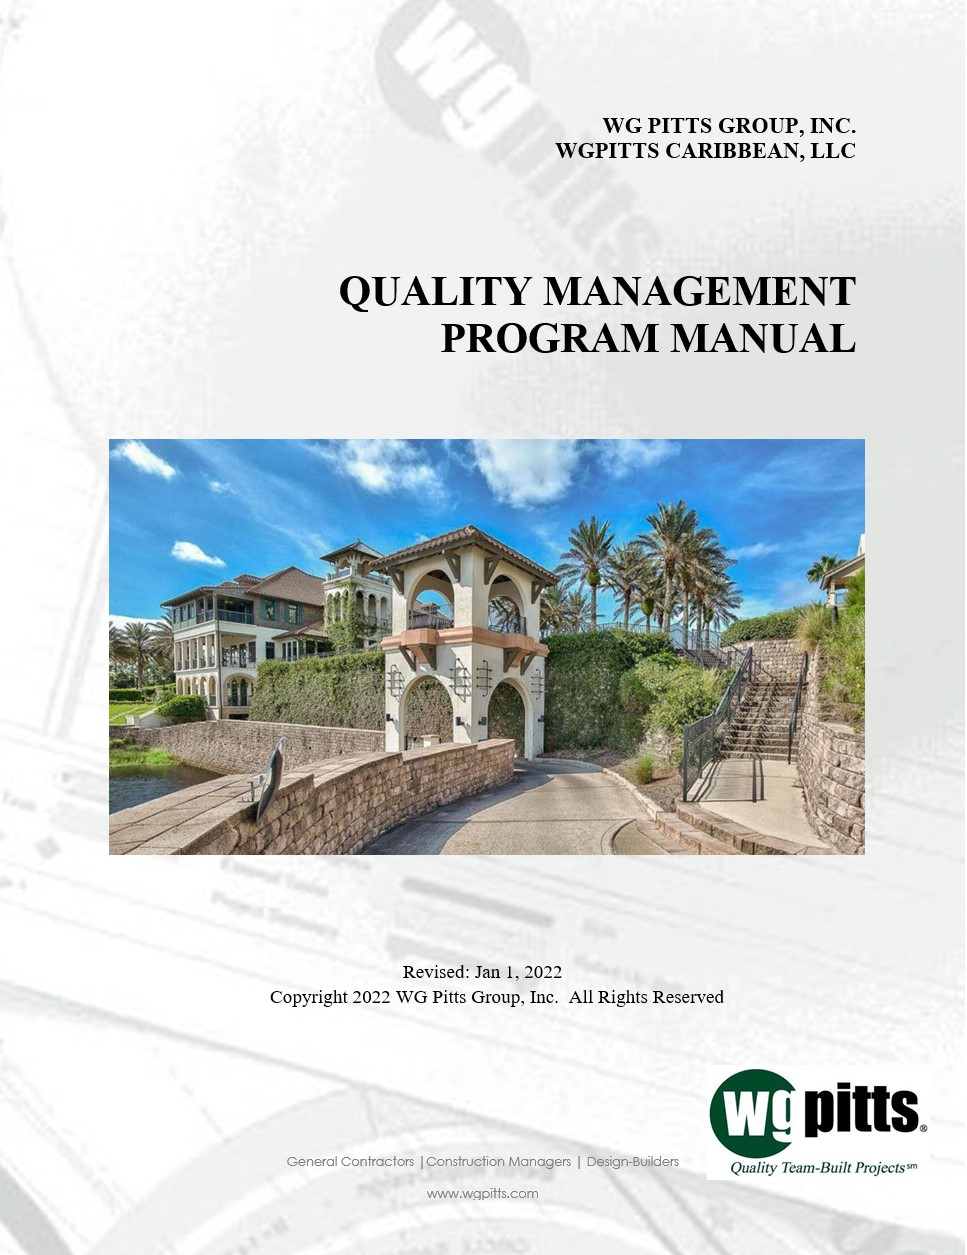 Quality Management plan cover